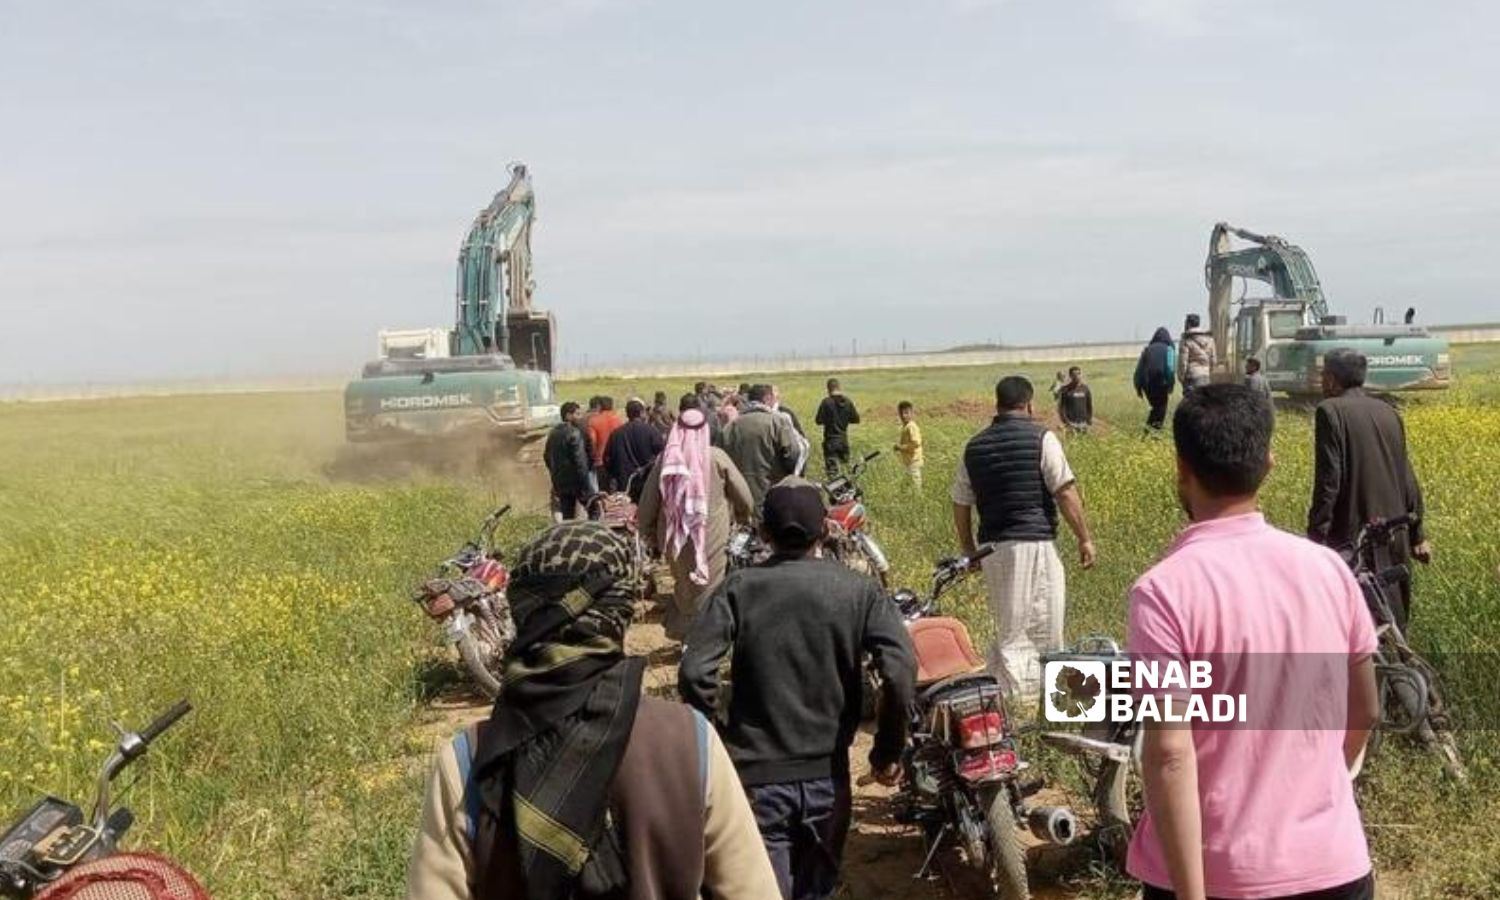 Farmers protest against the digging of a military trench through their land in northeastern Ras al-Ain region - April 18, 2023 (Enab Baladi/Hussein Shaabo)